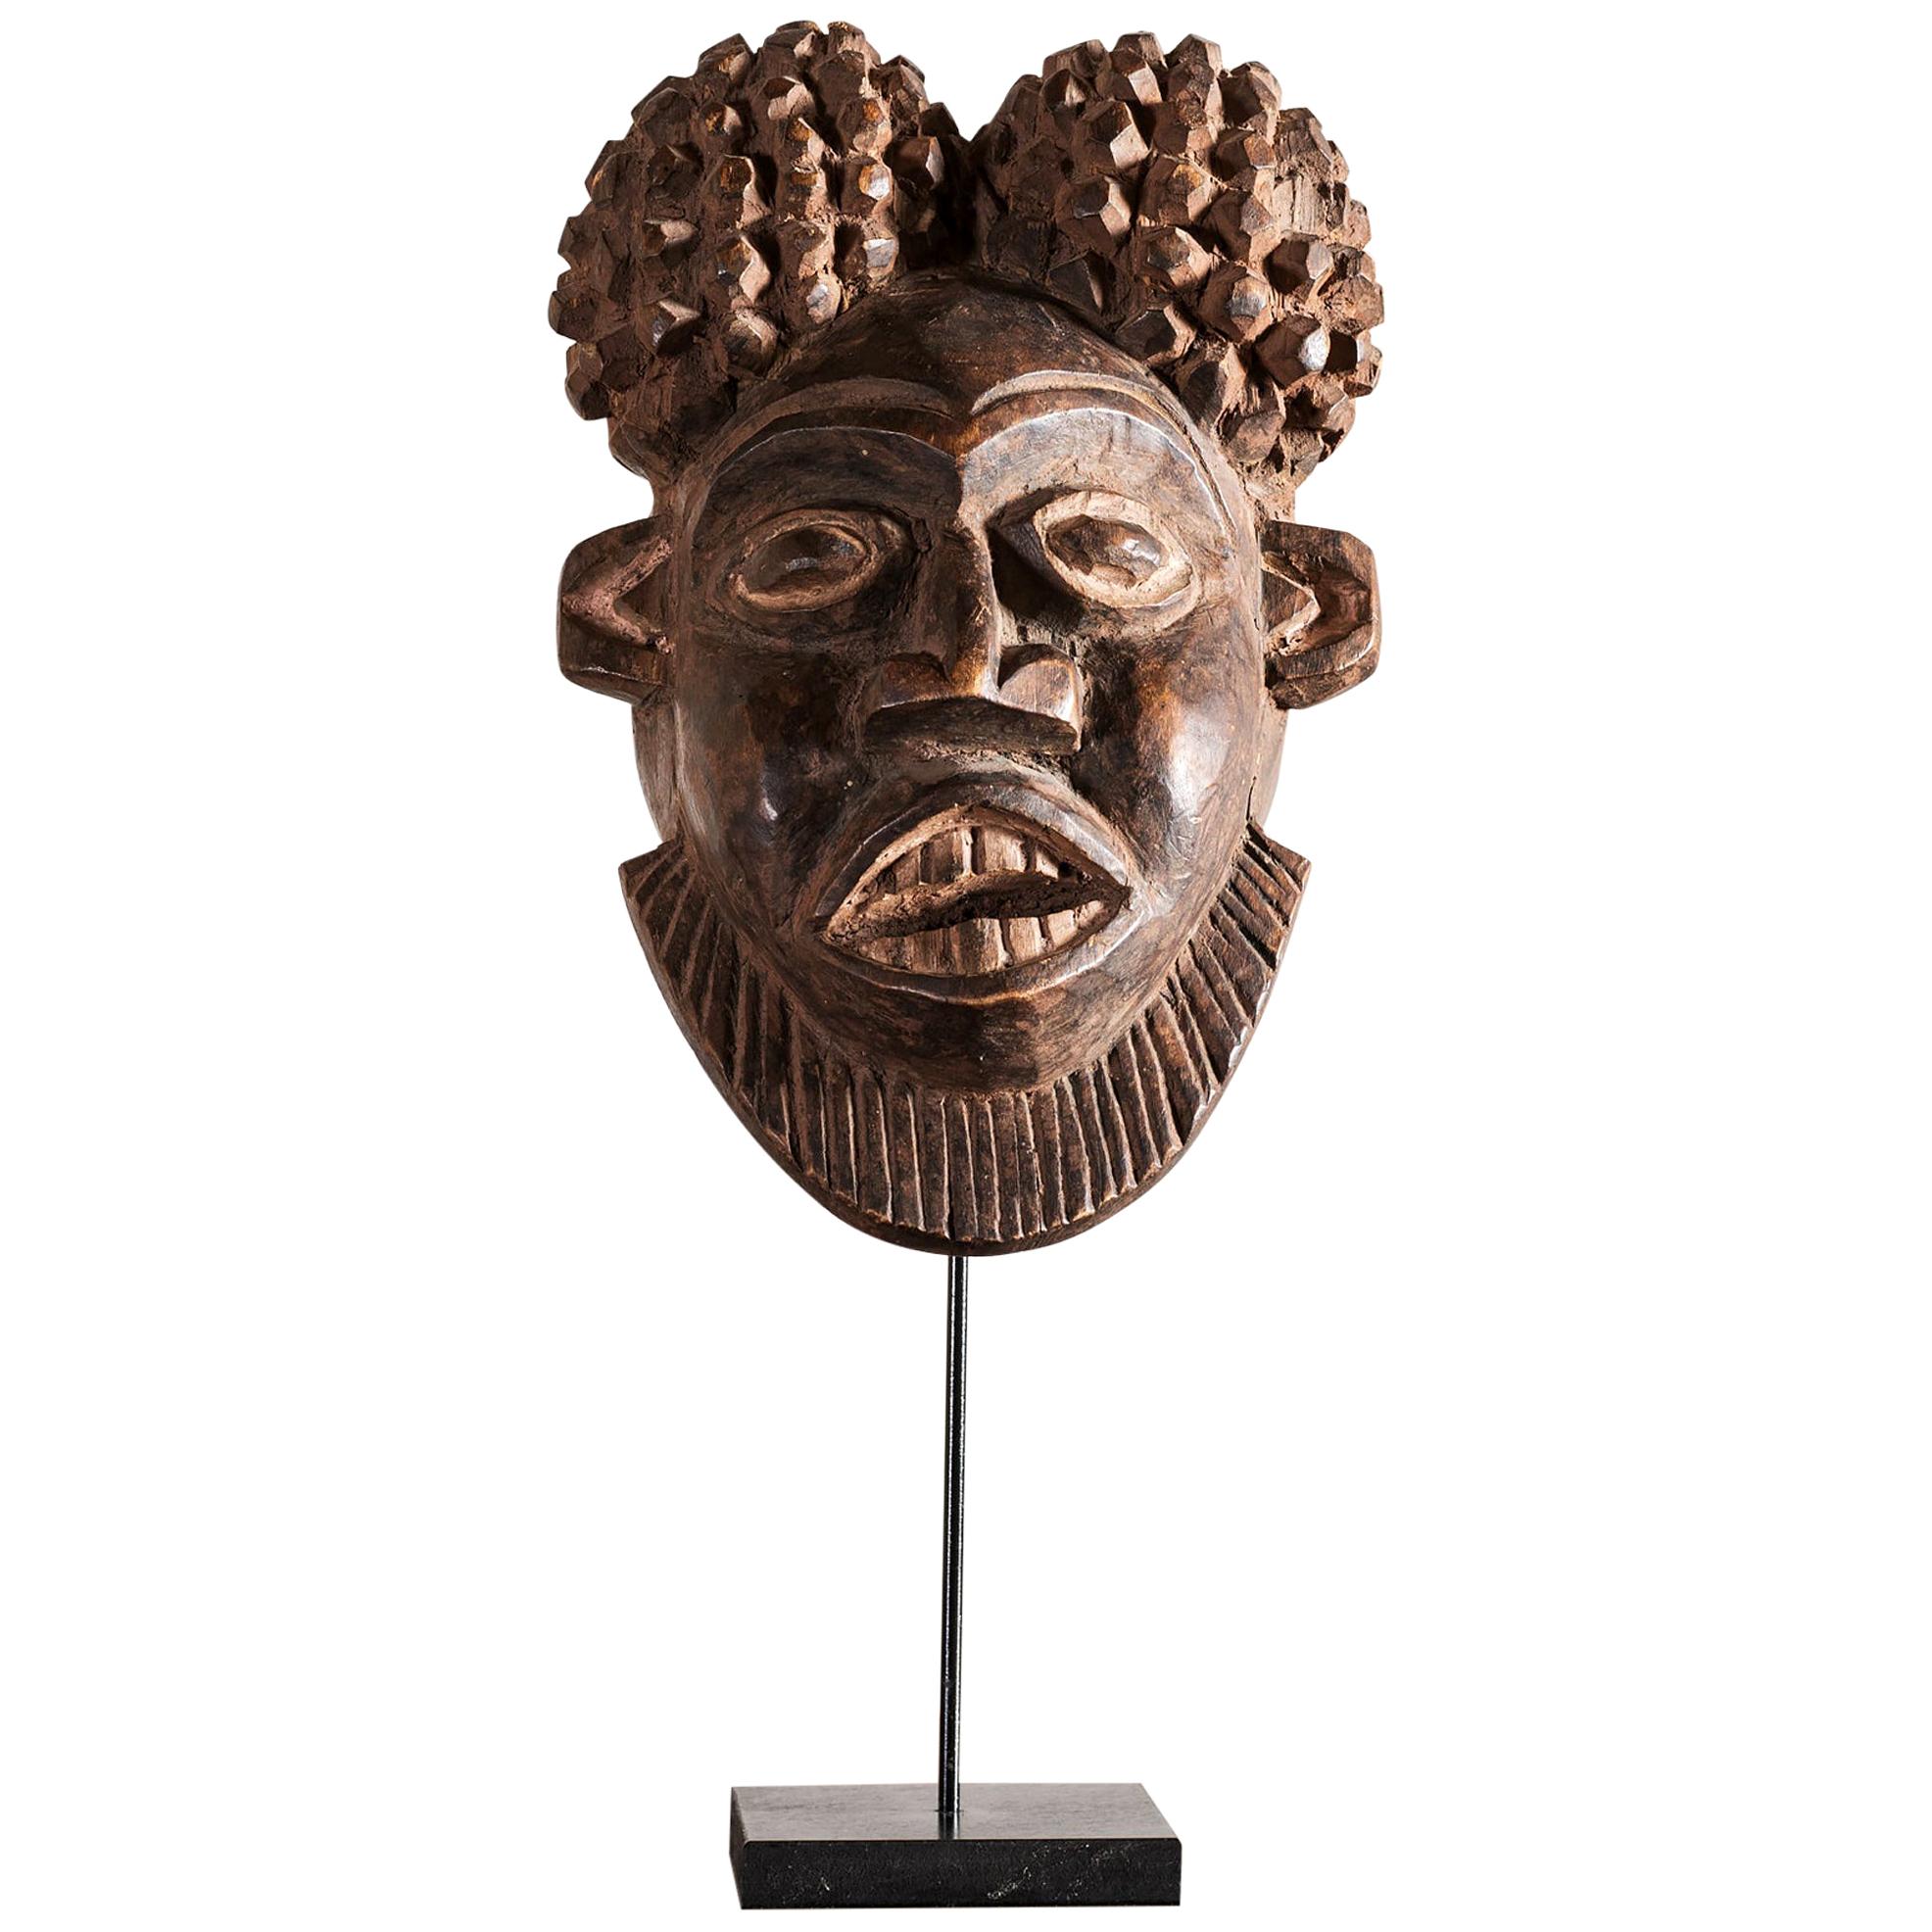 Decorative African Mask, Cameroon, 1950s